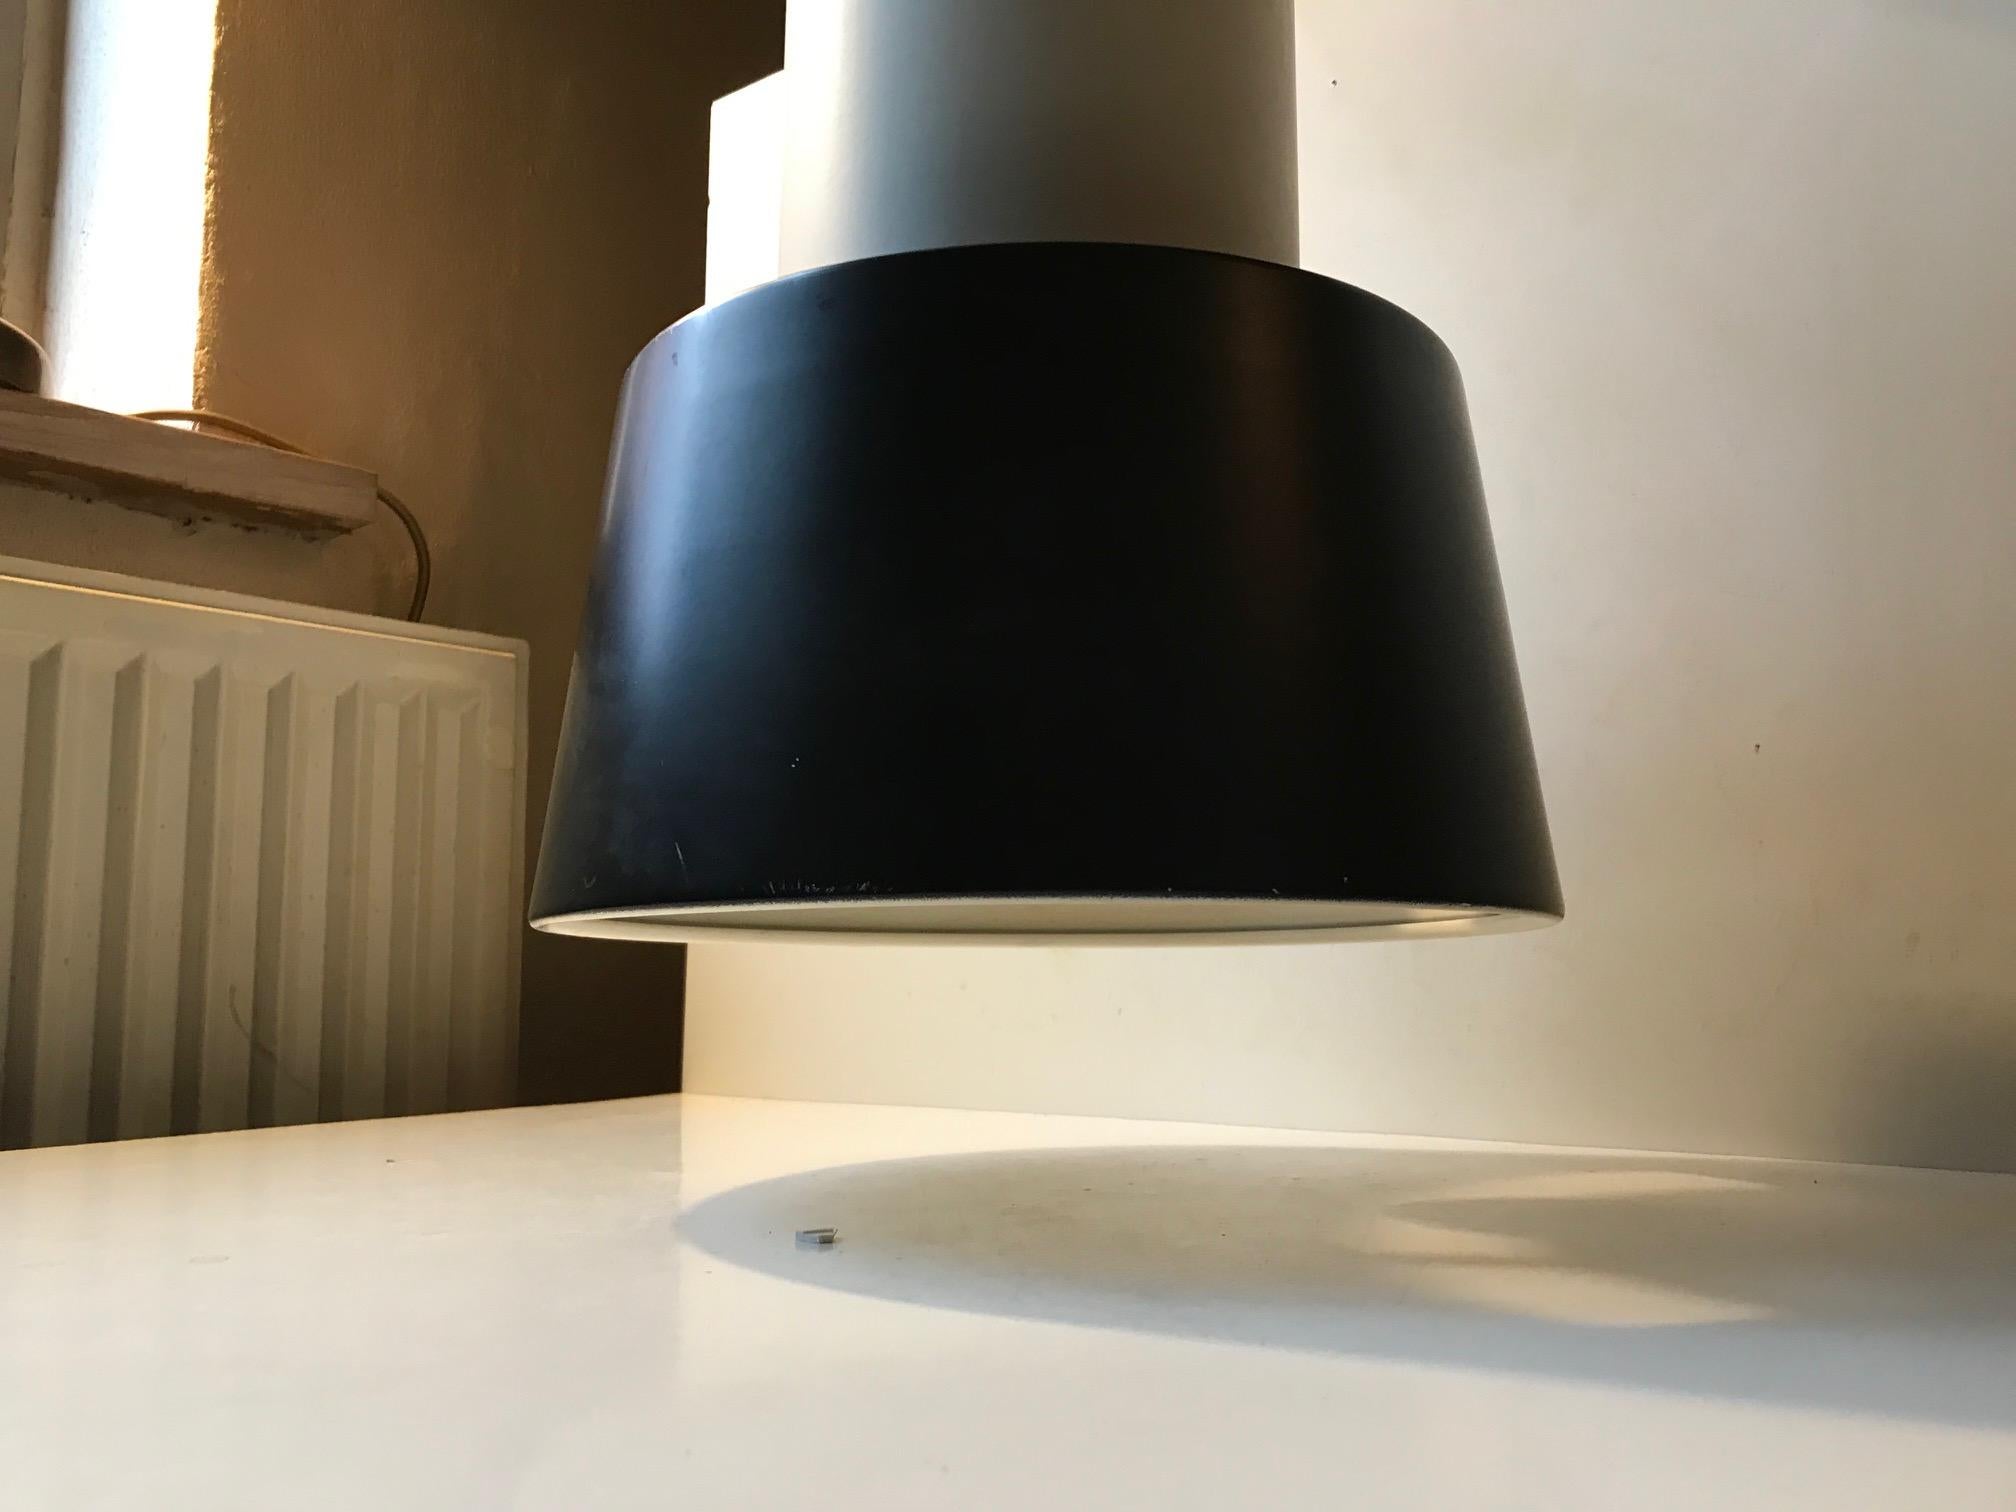 Black & White Nyboderpendel Ceiling Lamp by Svend Aage Petersen & Louis Poulsen In Good Condition For Sale In Esbjerg, DK